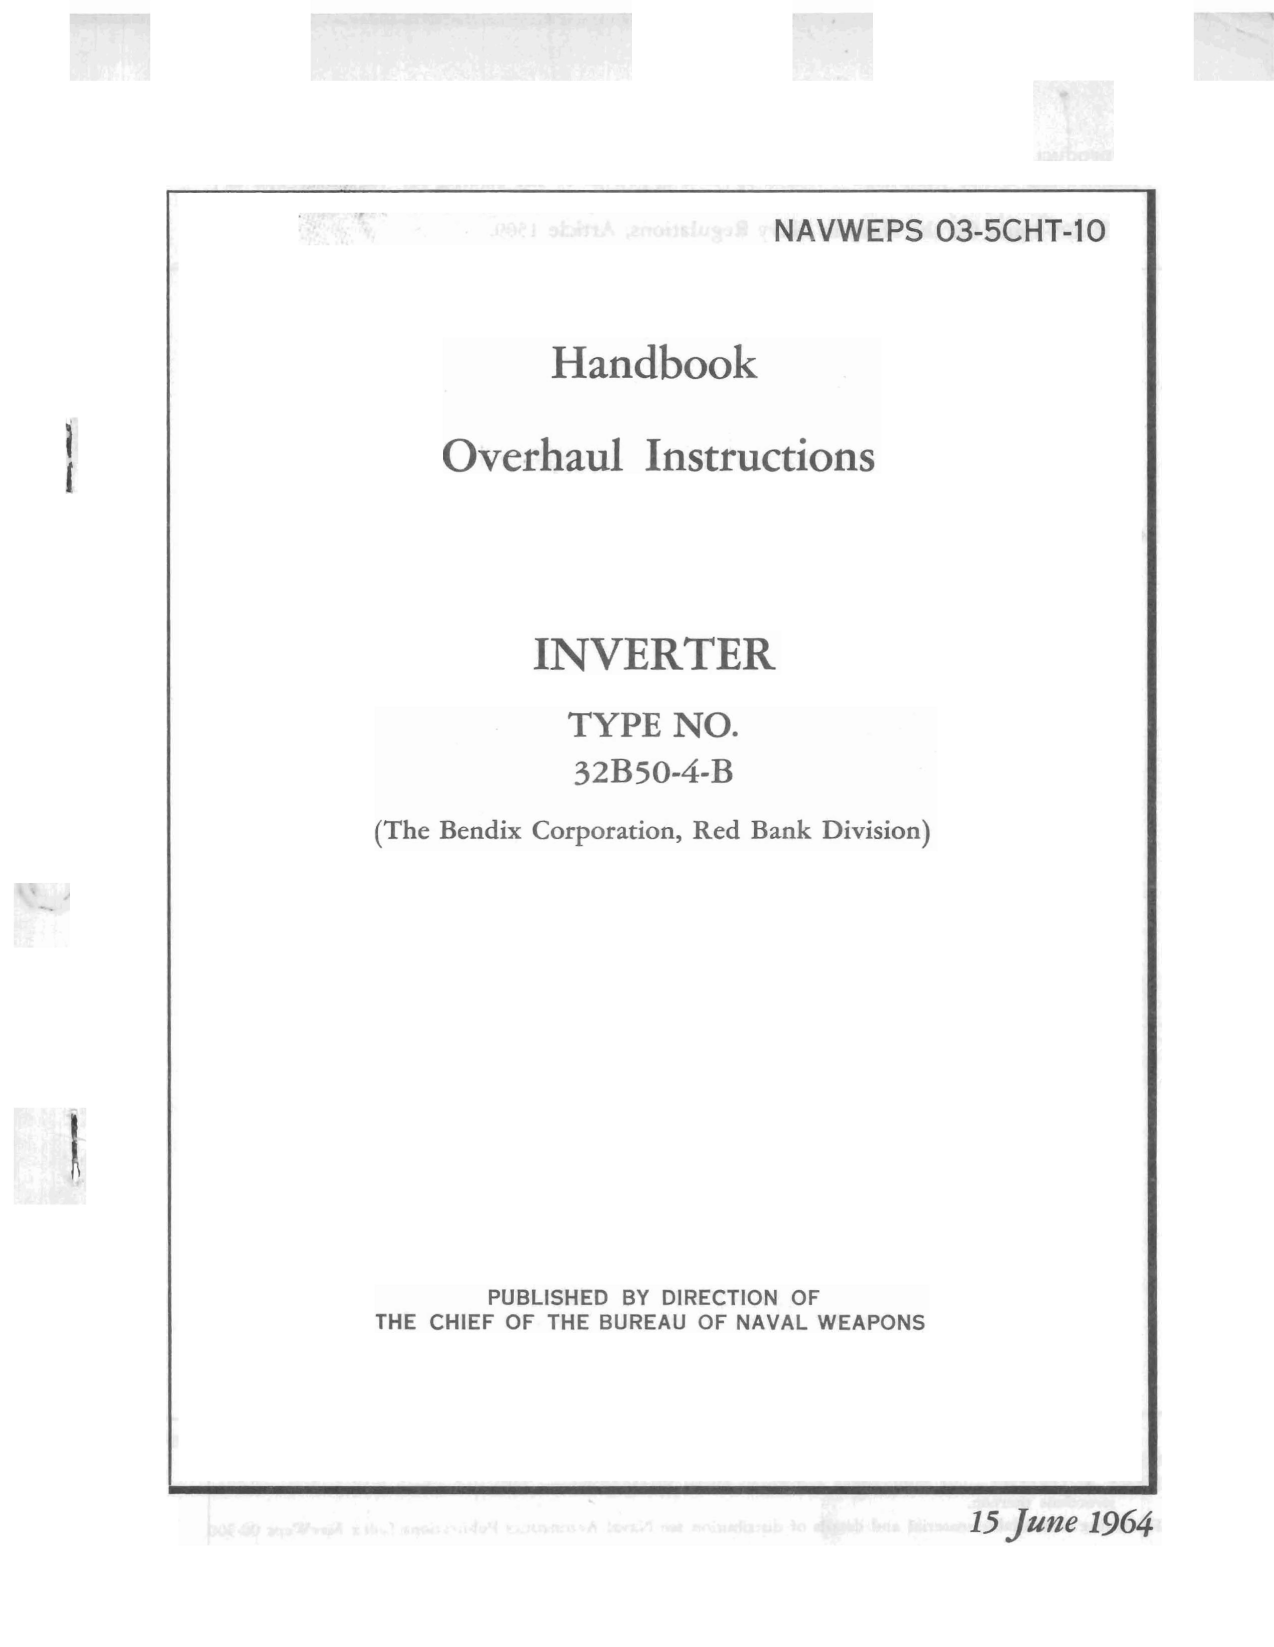 Sample page 1 from AirCorps Library document: Overhaul Instructions for Inverter - Type 32B50-4-B